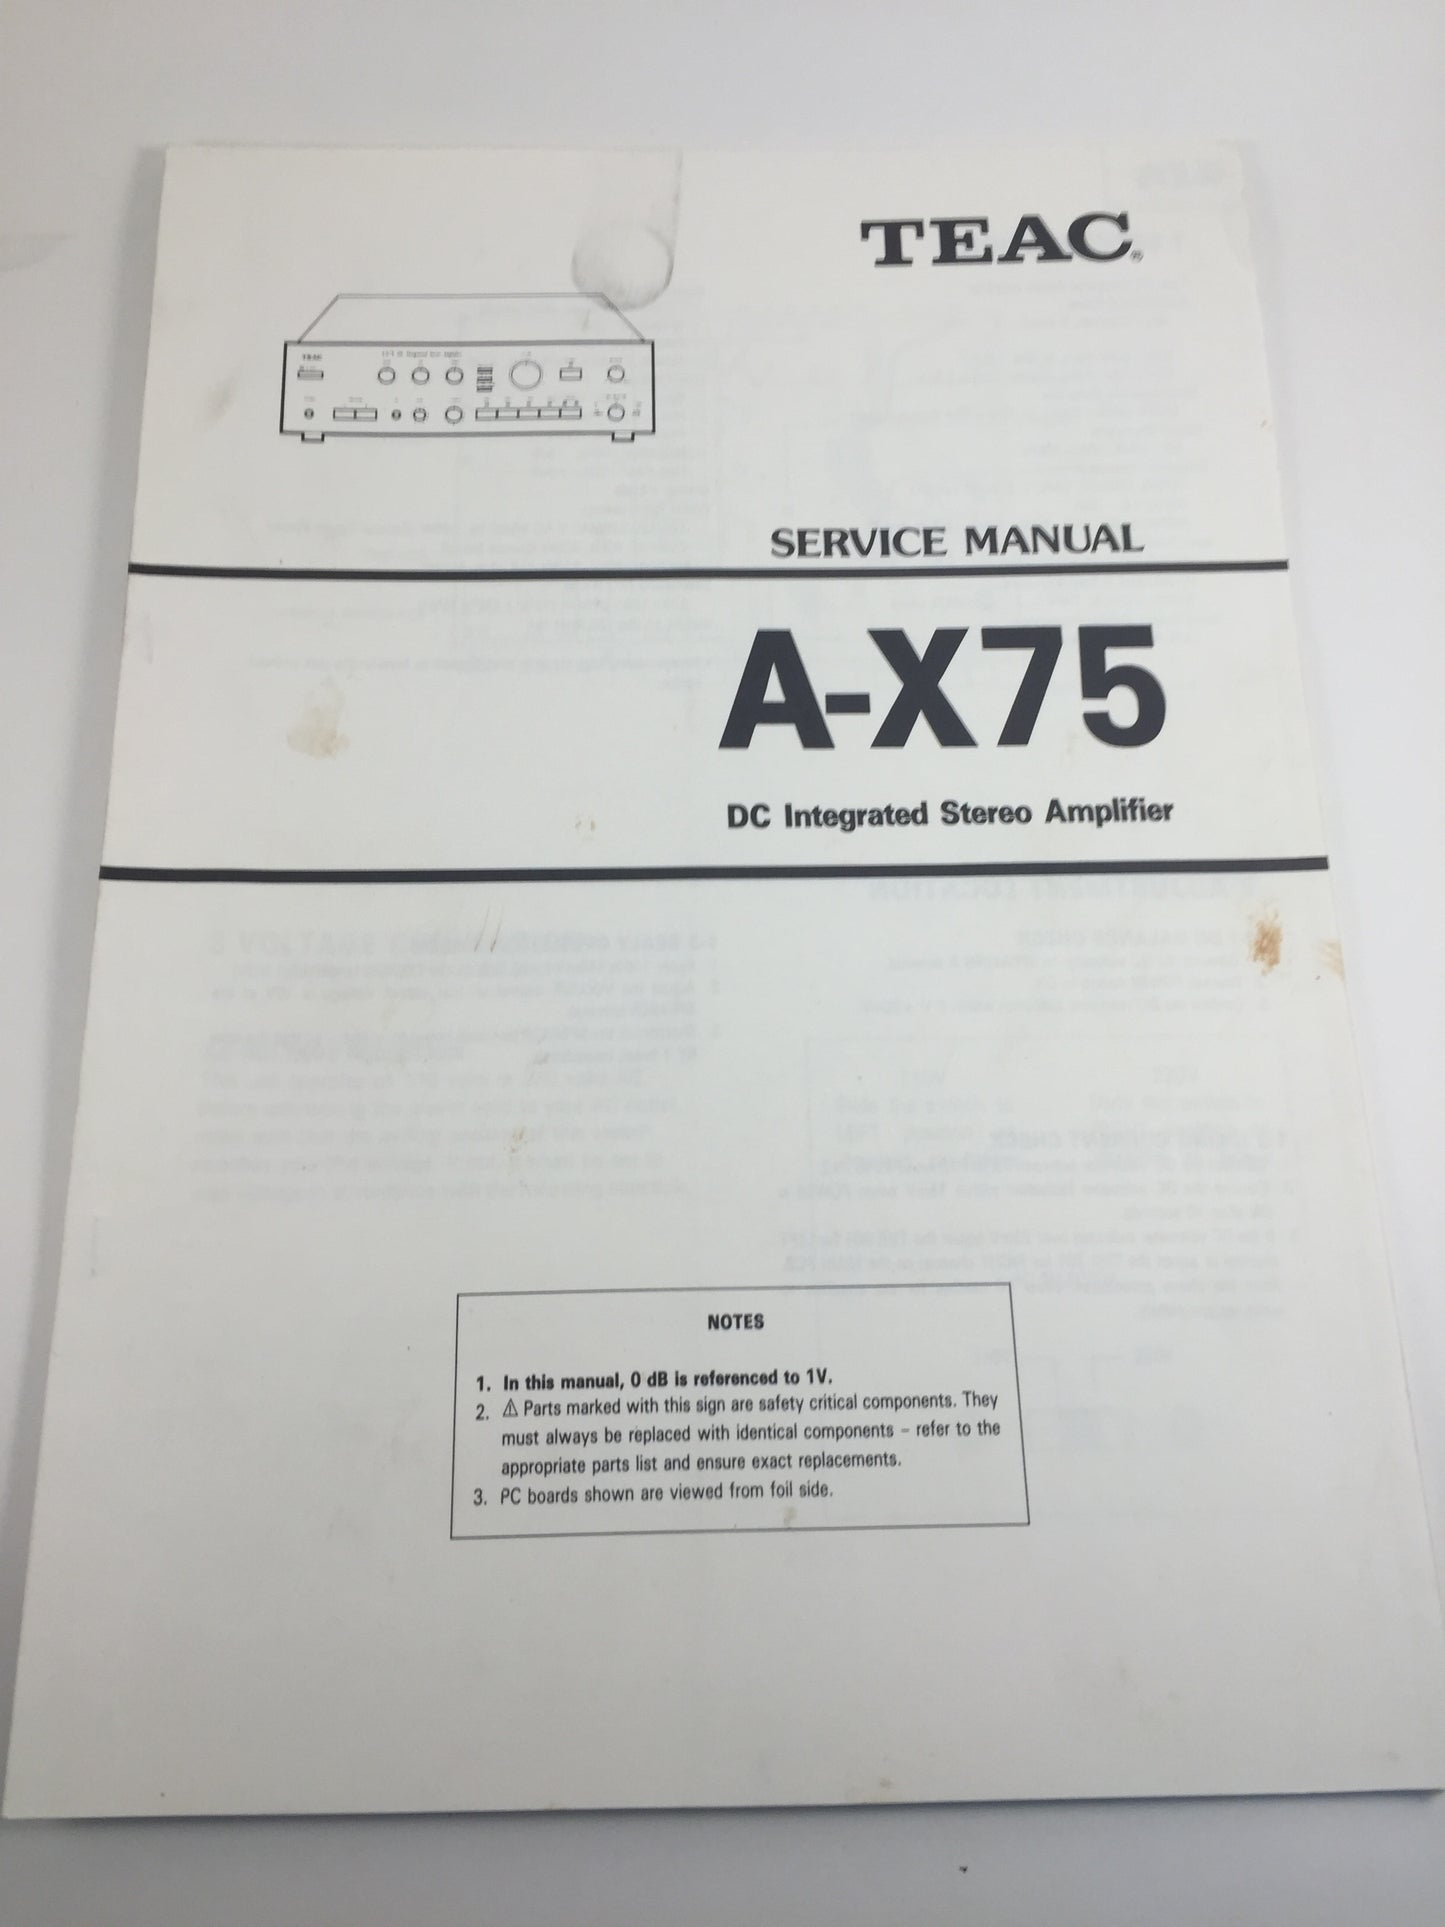 TEAC A-X75 DC Integrated Stereo Amplifier Service Manual